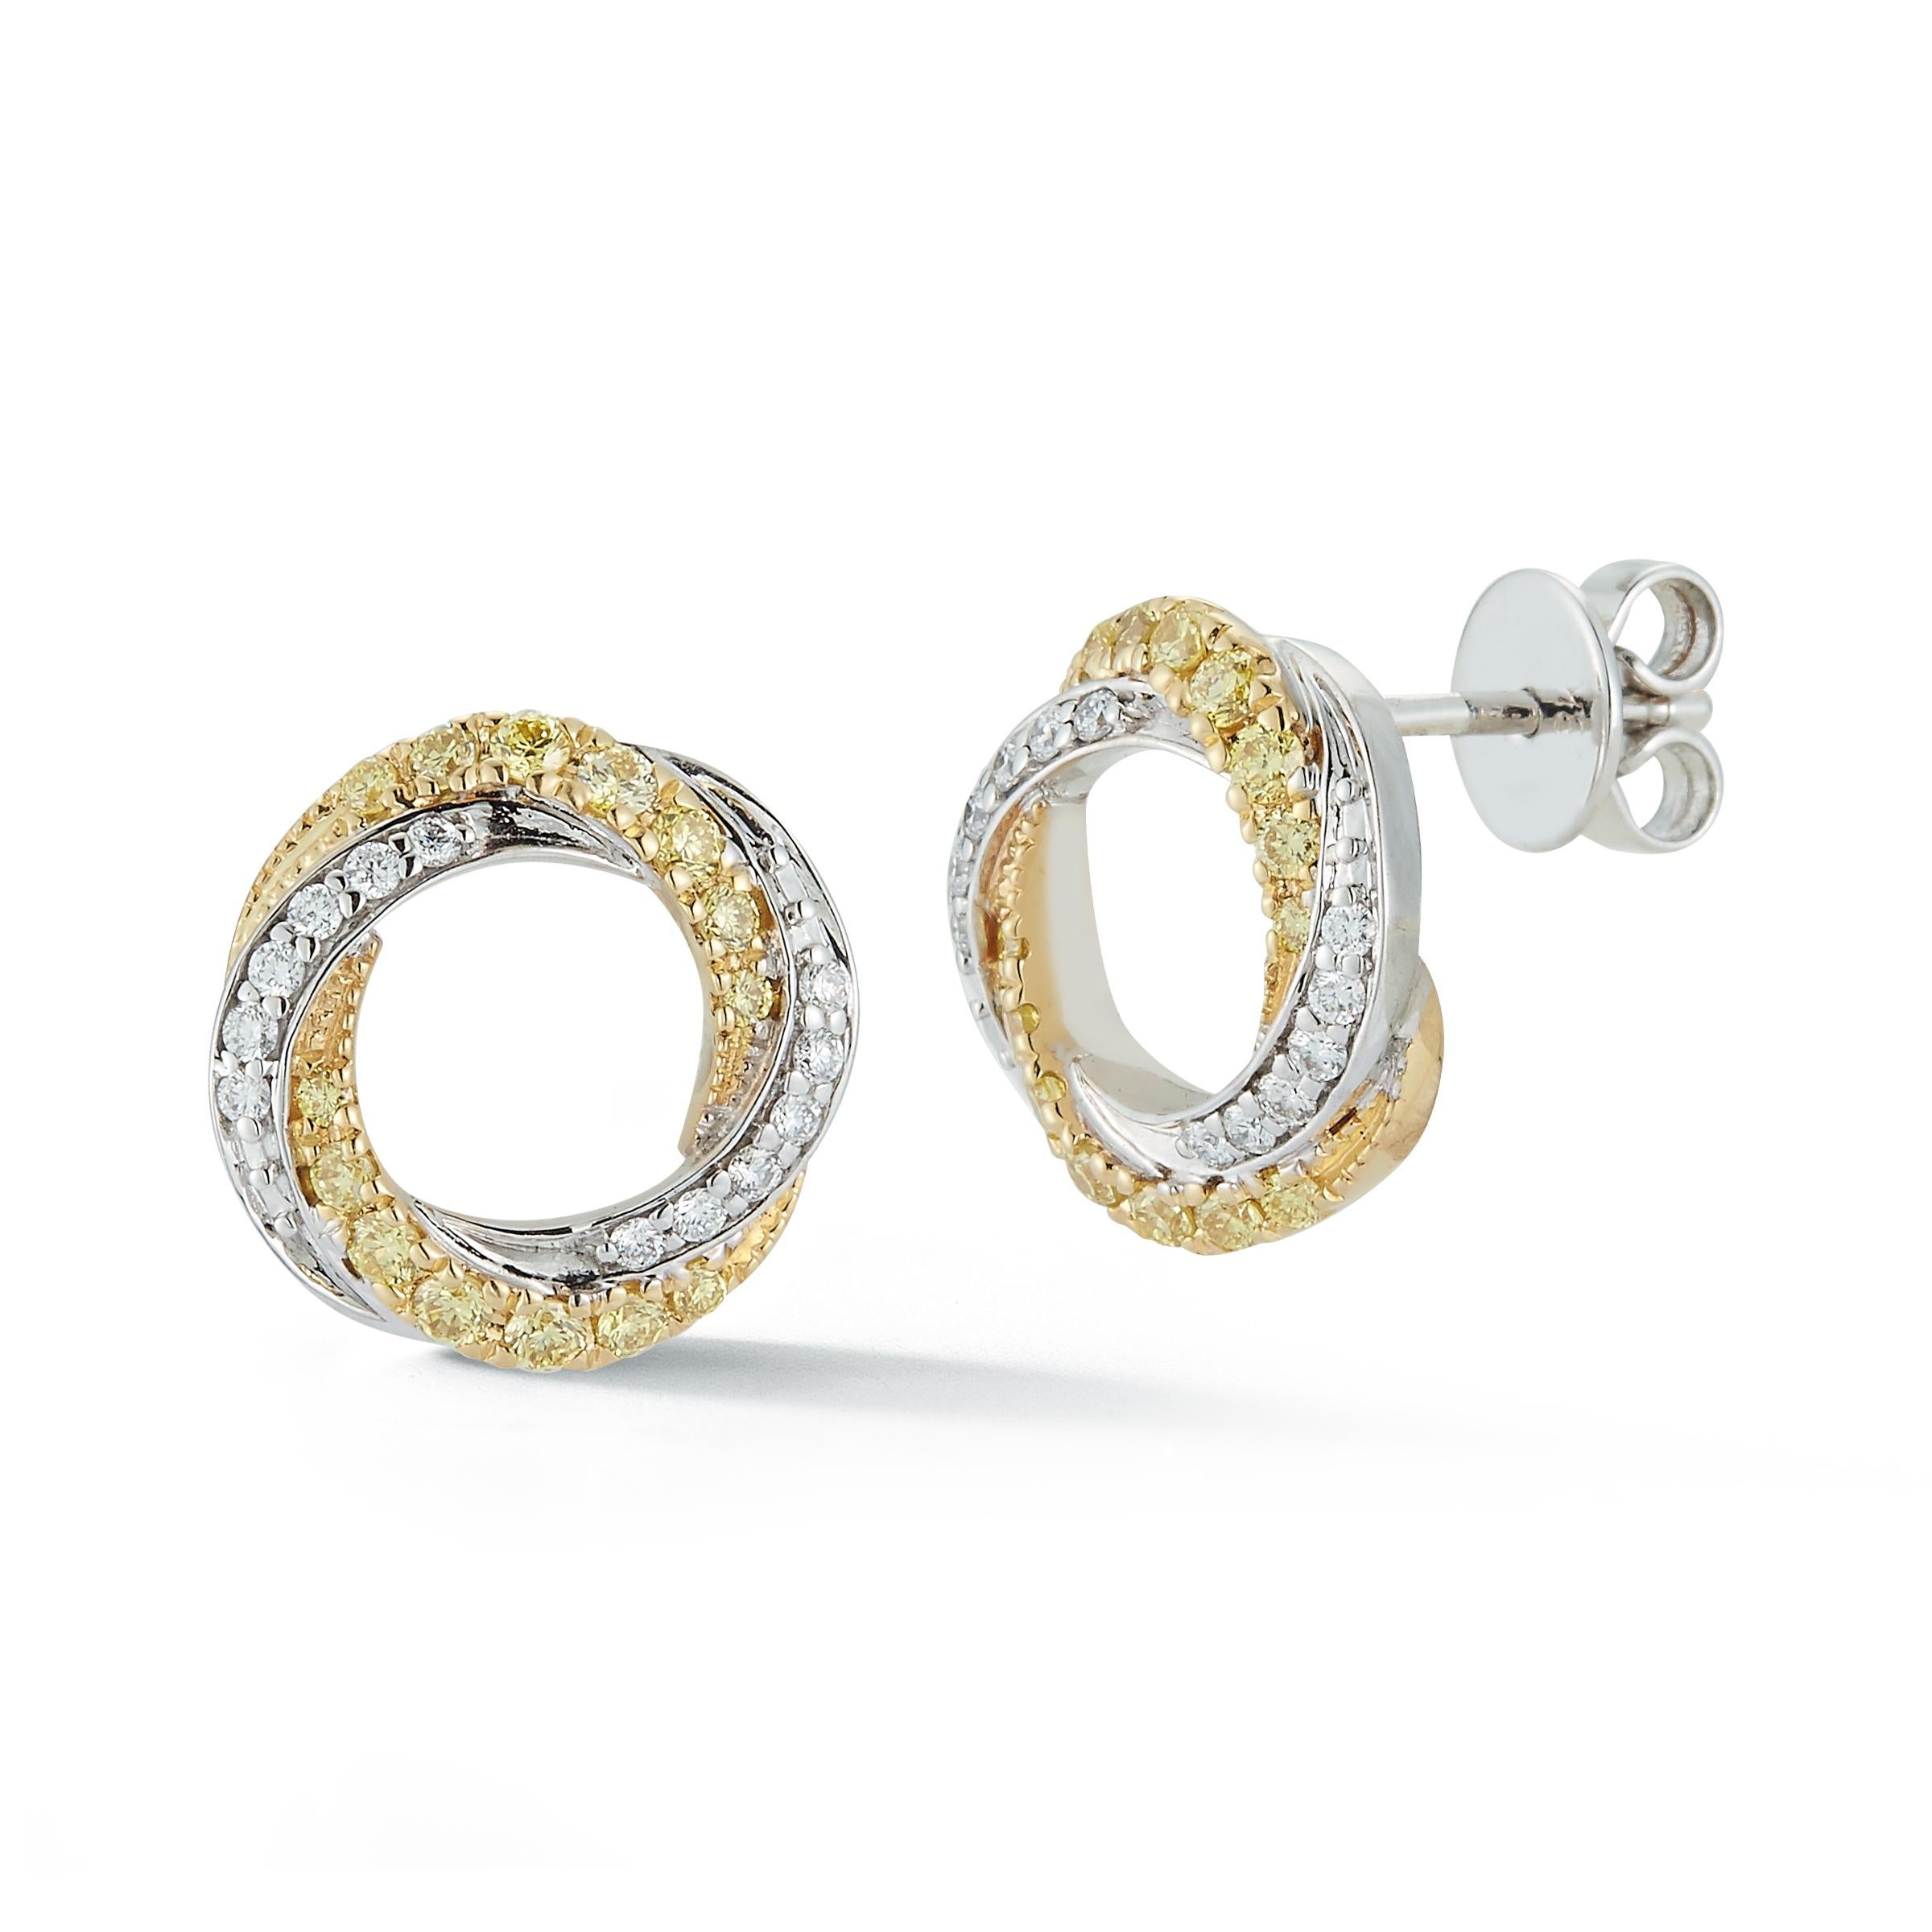 RareGemWorld's classic diamond earrings. Mounted in a beautiful 18K Yellow and White Gold setting with natural round cut yellow diamonds. These earrings include both natural round yellow diamond melee and natural round white diamond melee in a